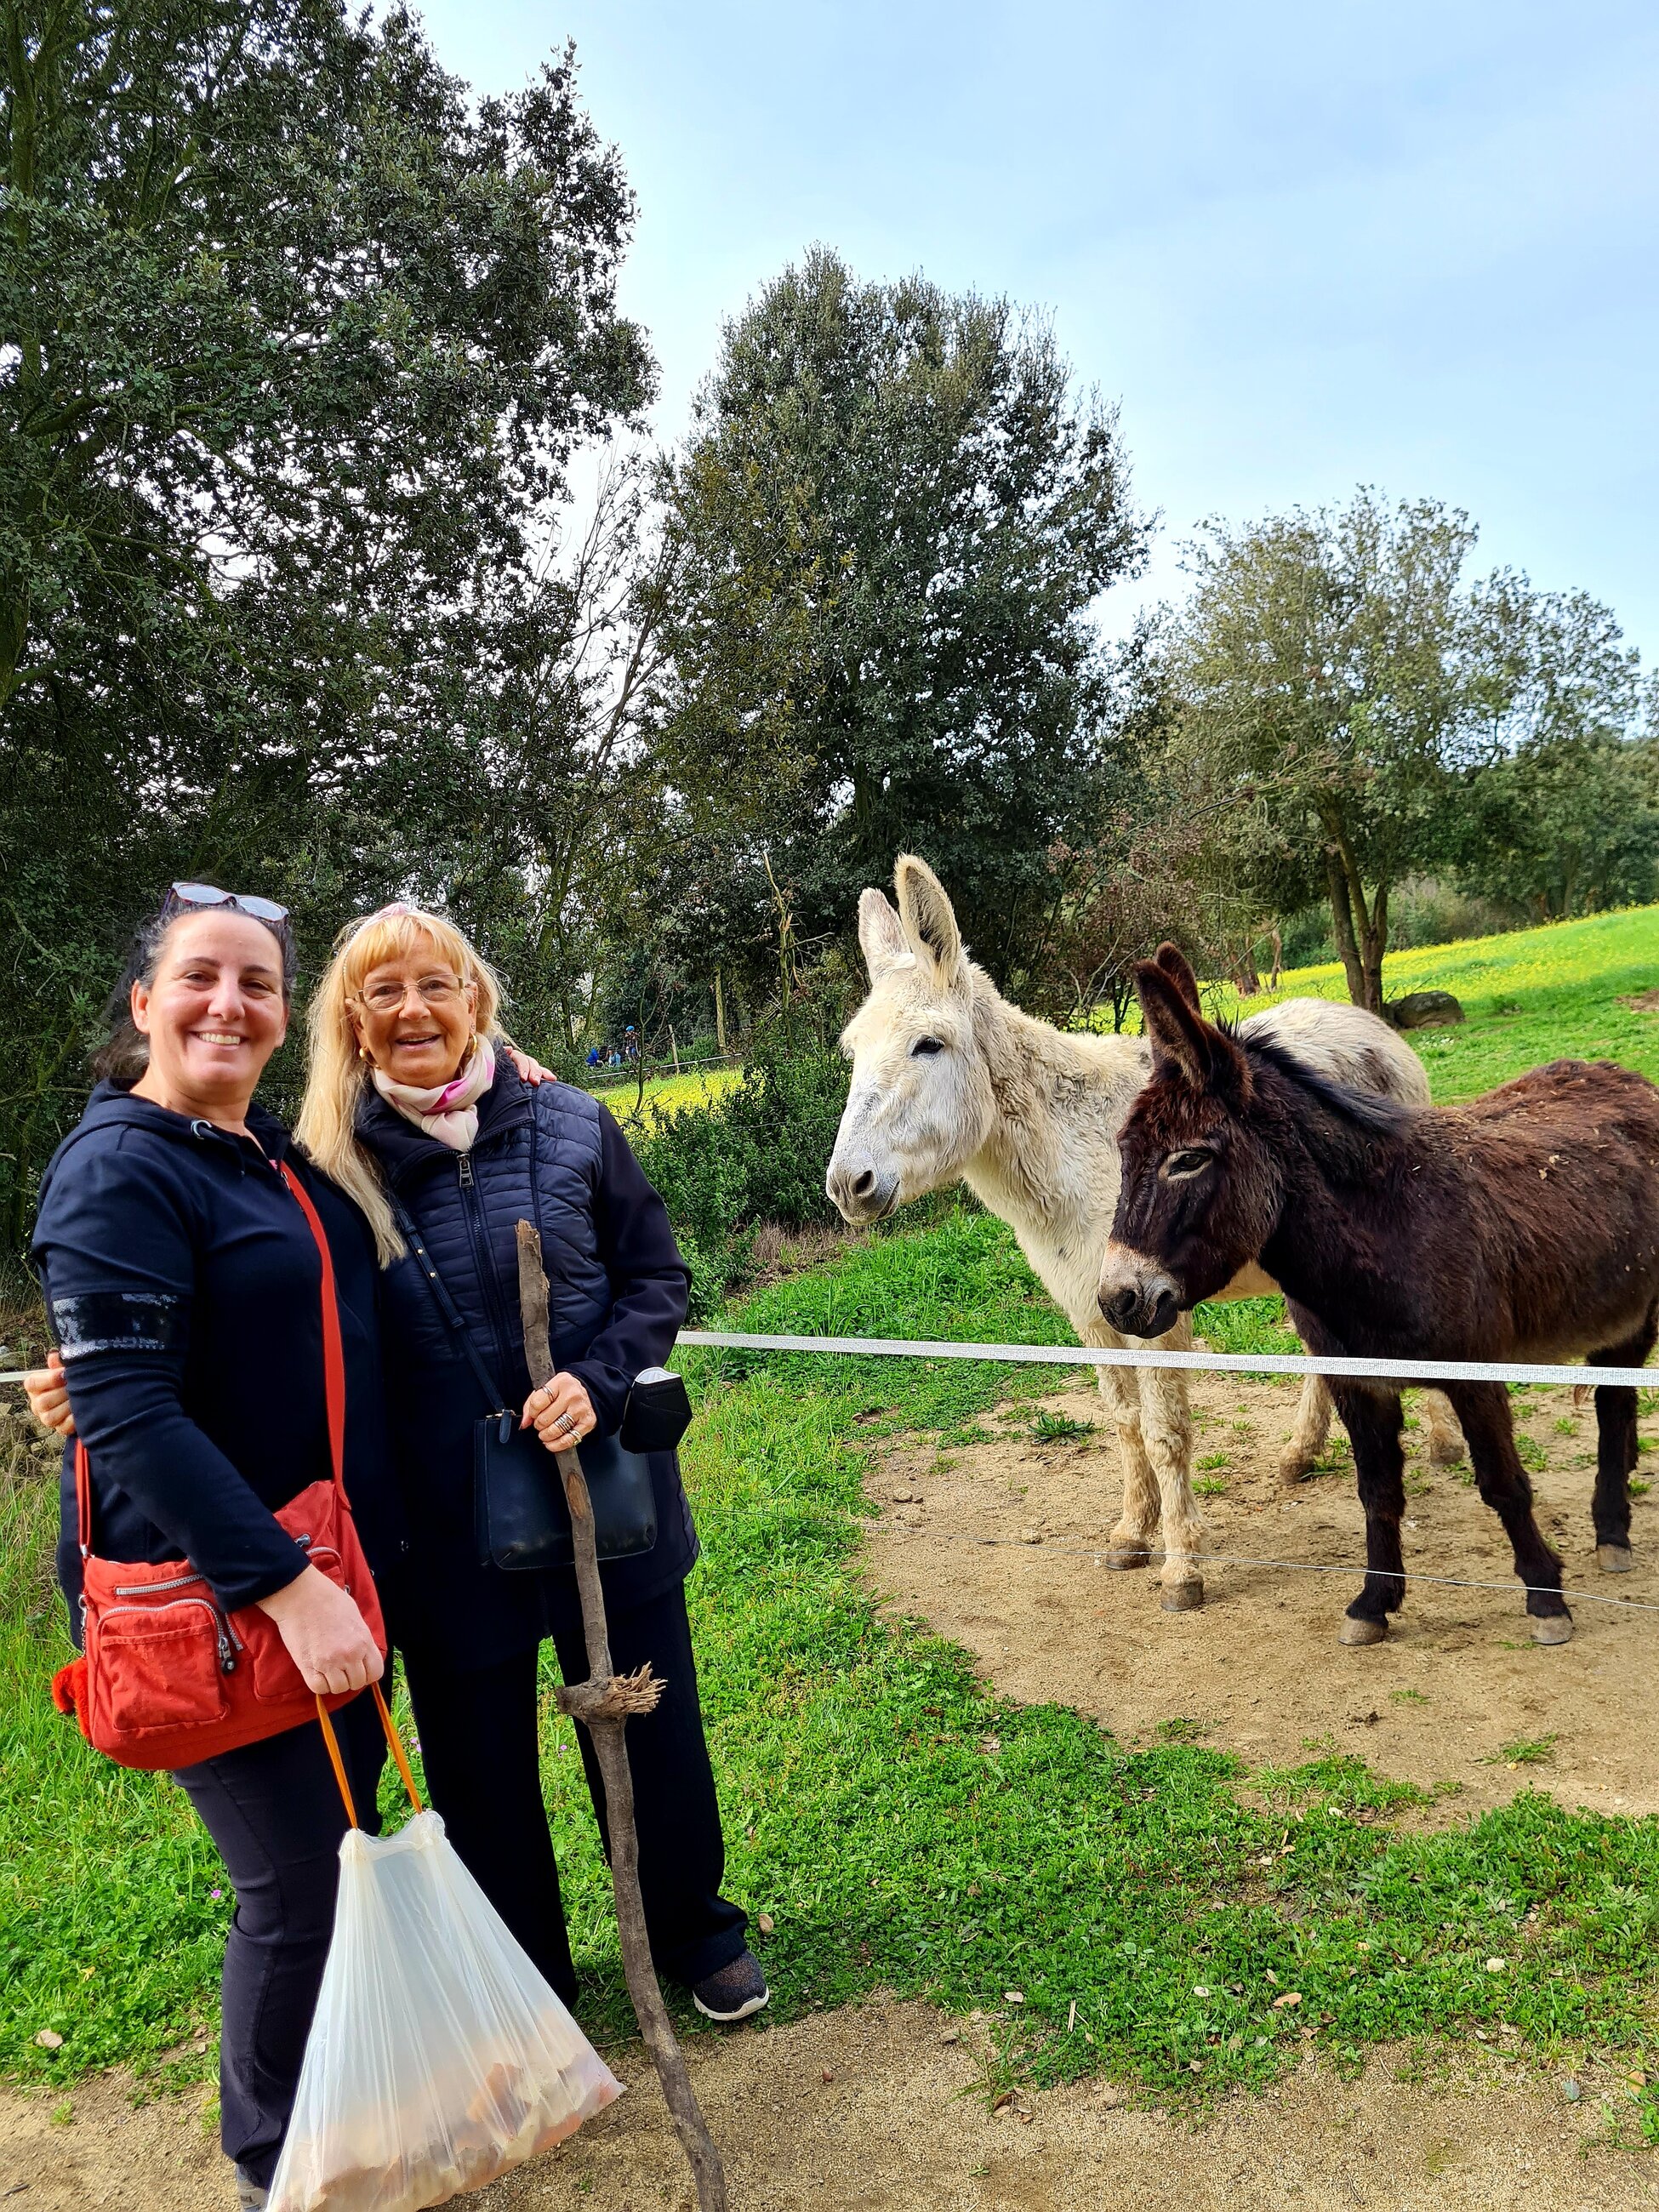 Visit to Rukimon, a donkey reserve in the Montnege i Corredor Park